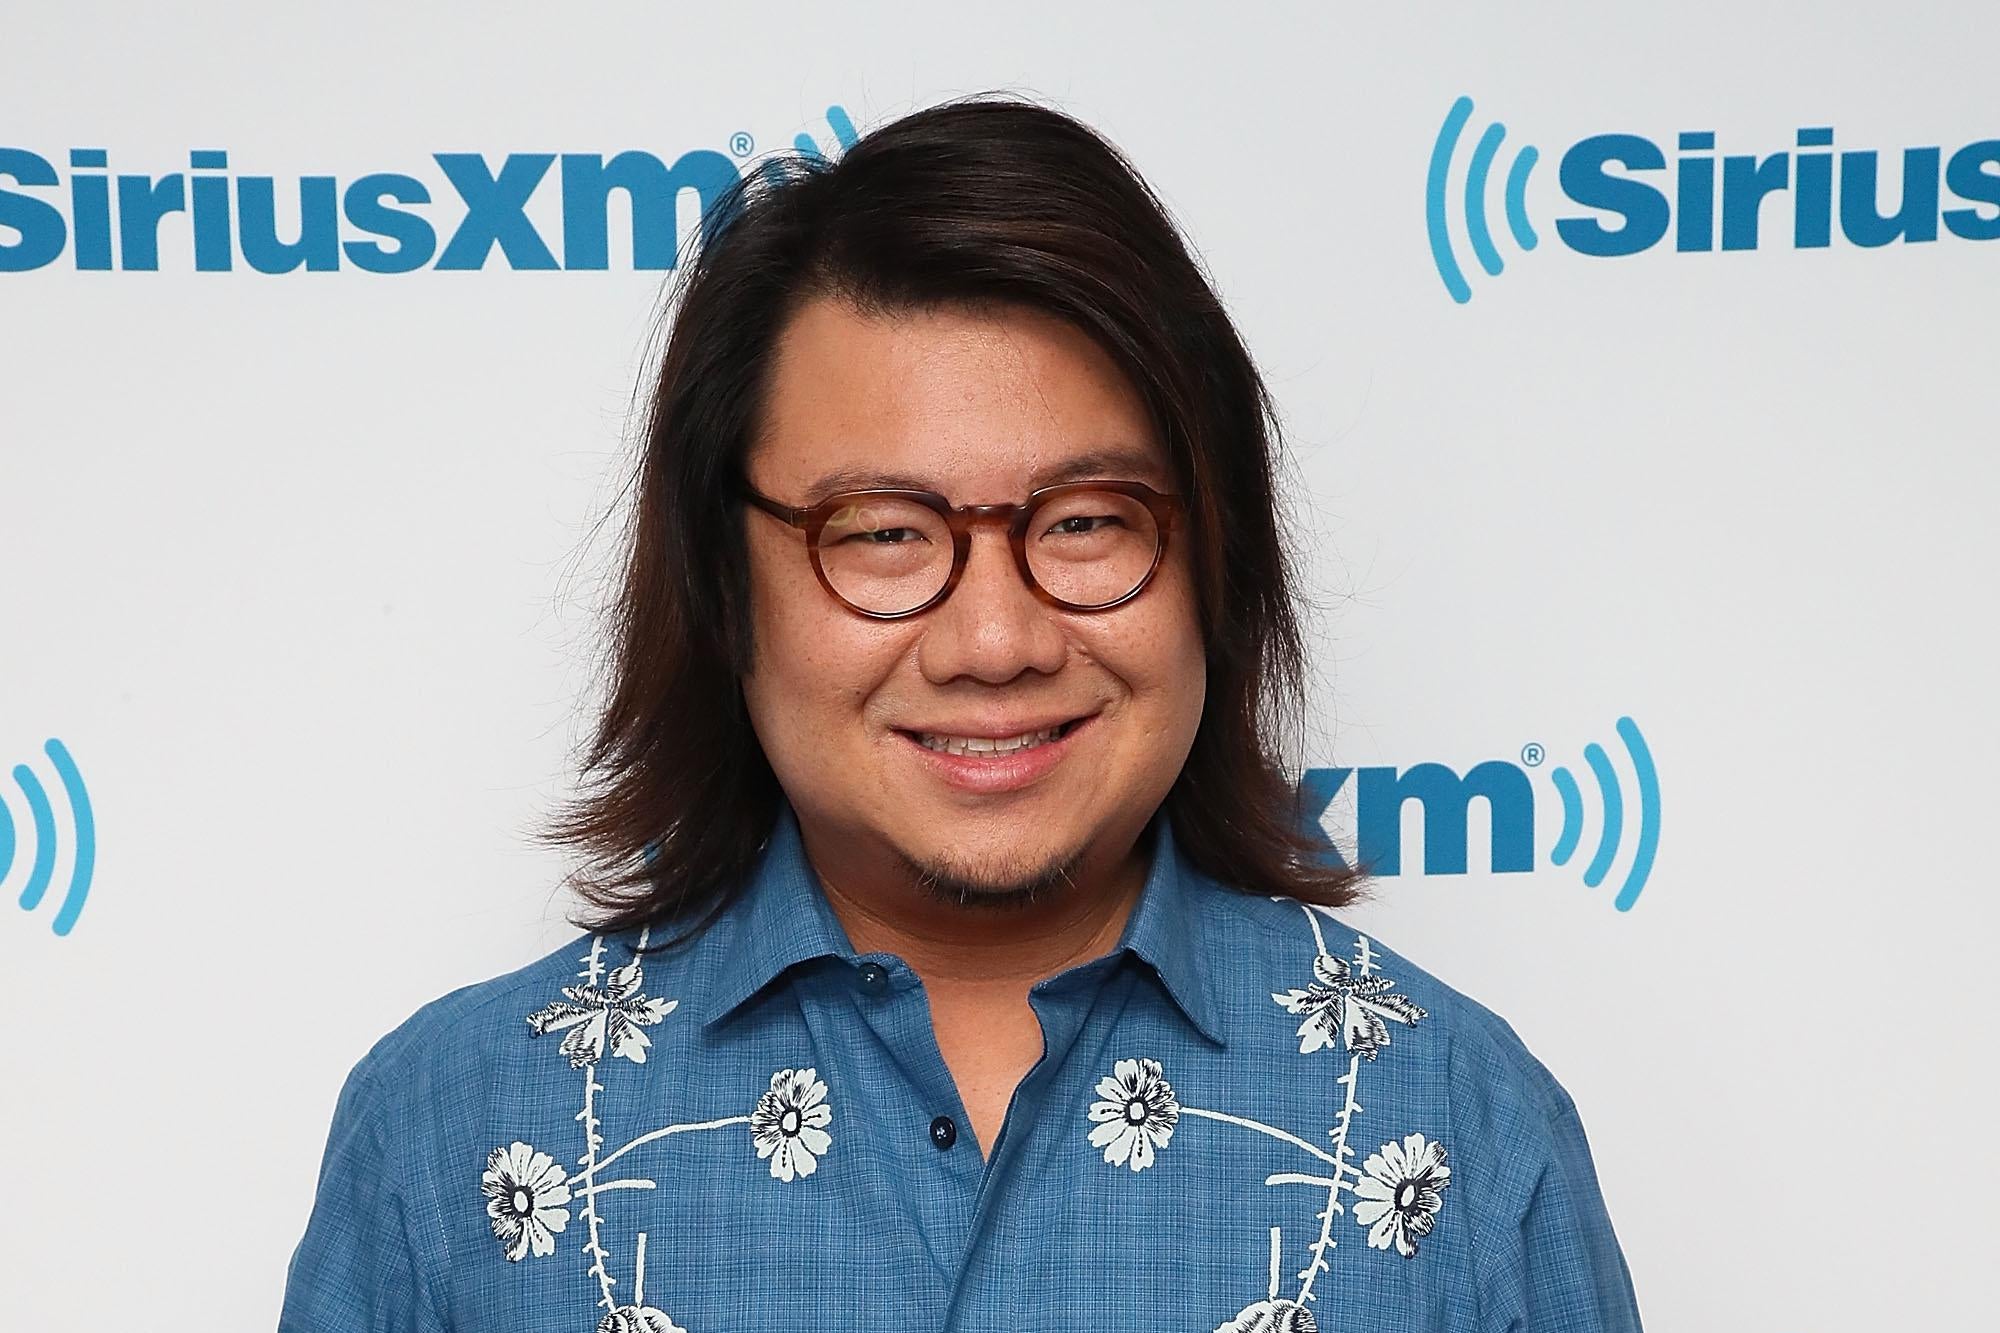 Kevin Kwan, wearing a blue shirt with white flowers and black glasses, stands and smiles at the camera.